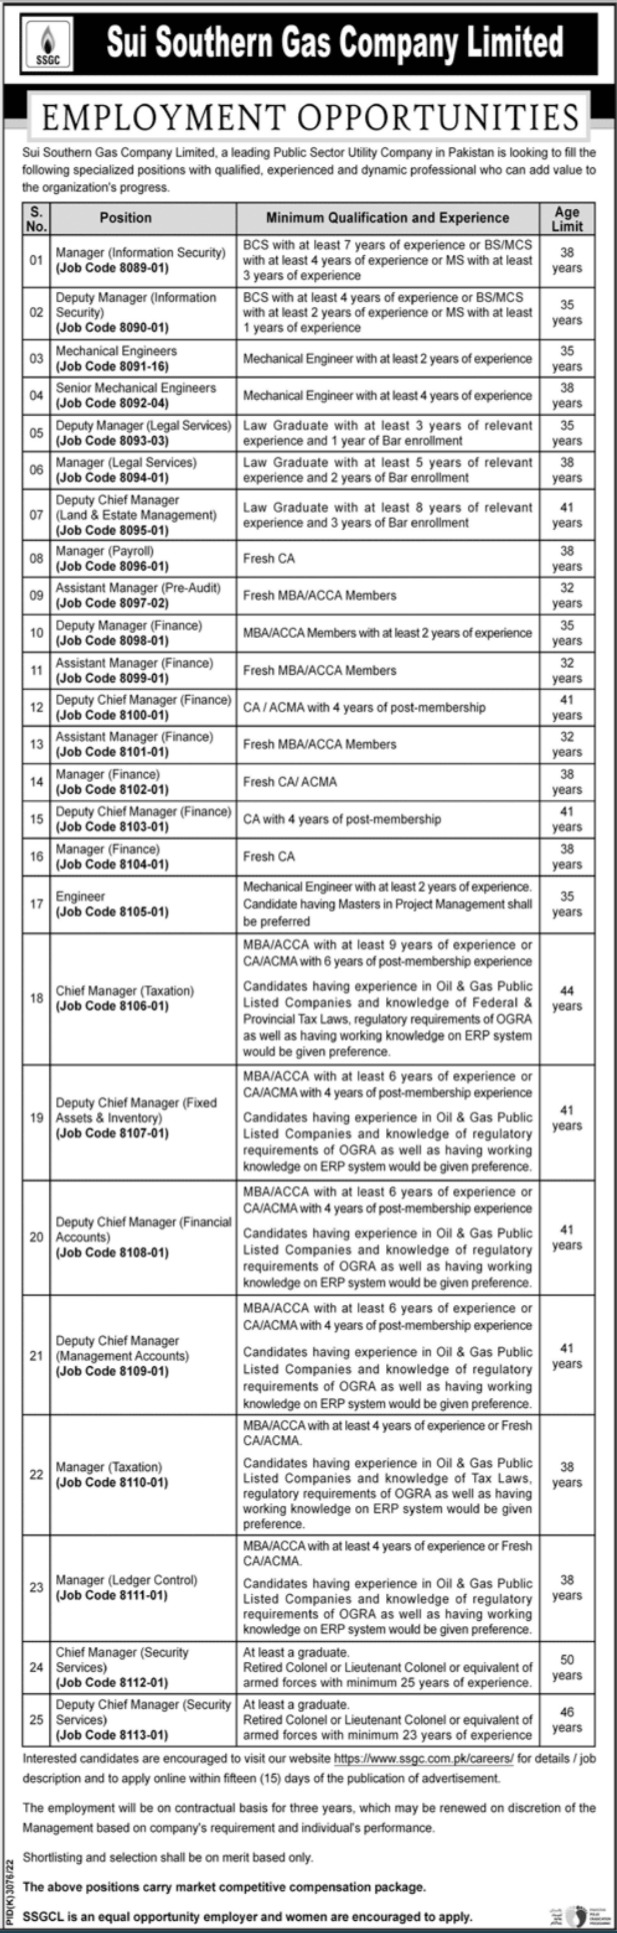 New Govt Jobs At Sui Southern Gas Company jobs 2022 latest advertisments